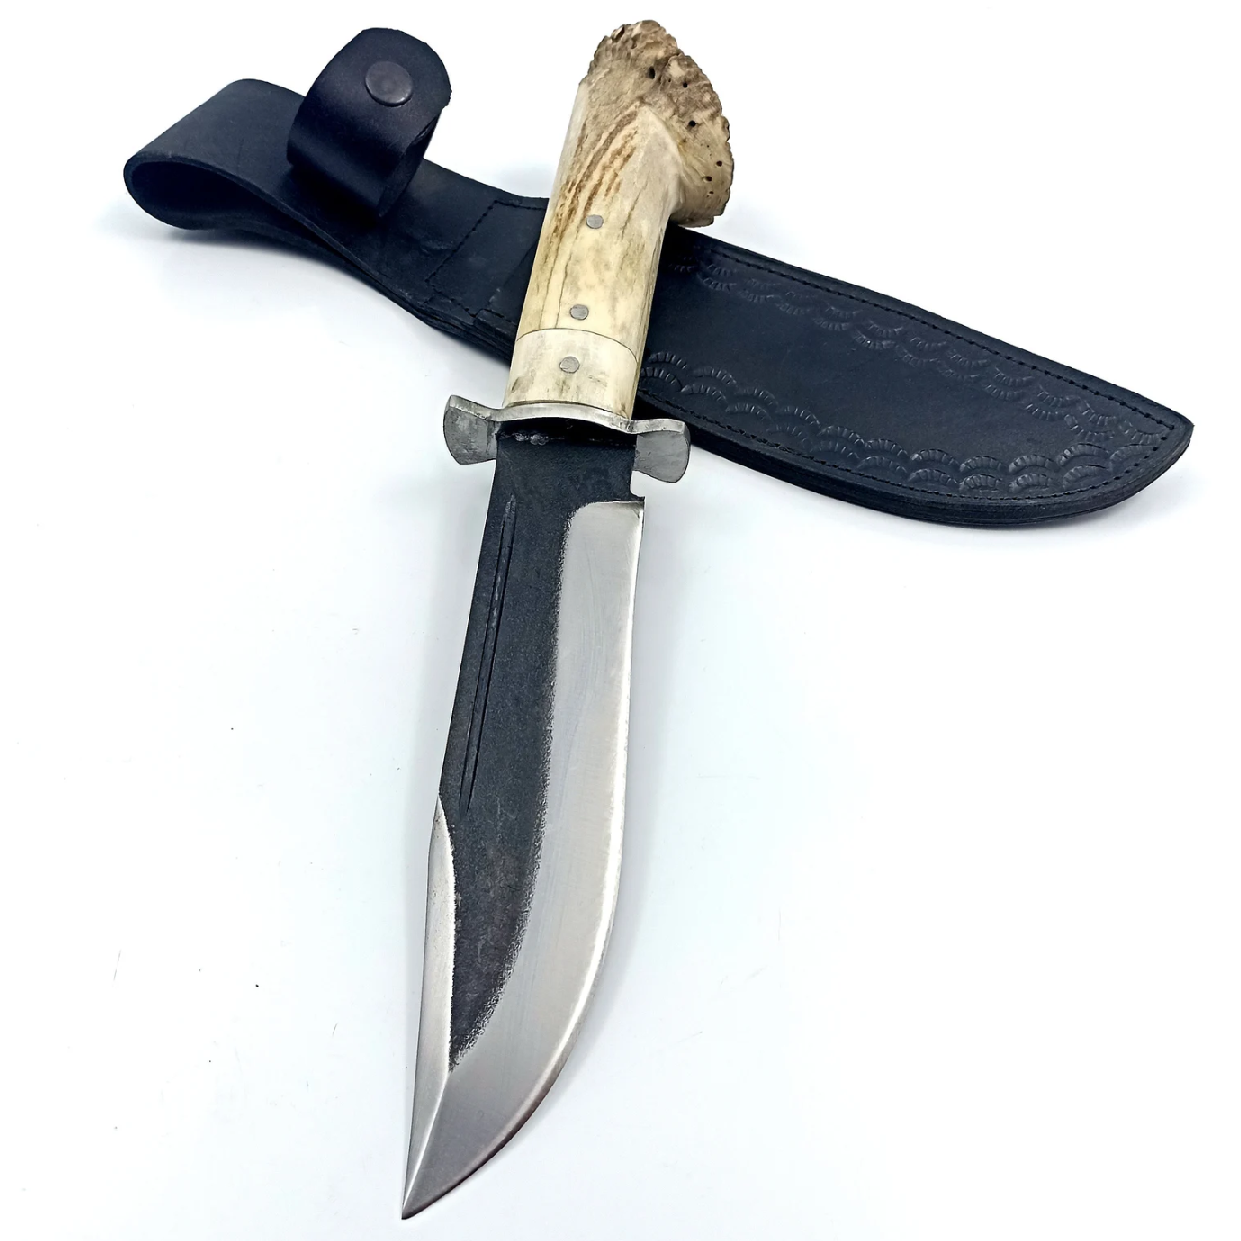 STAG HORN HANDLE, GUT HOOK 11 CM STAINLESS STEEL FIXED BLADE